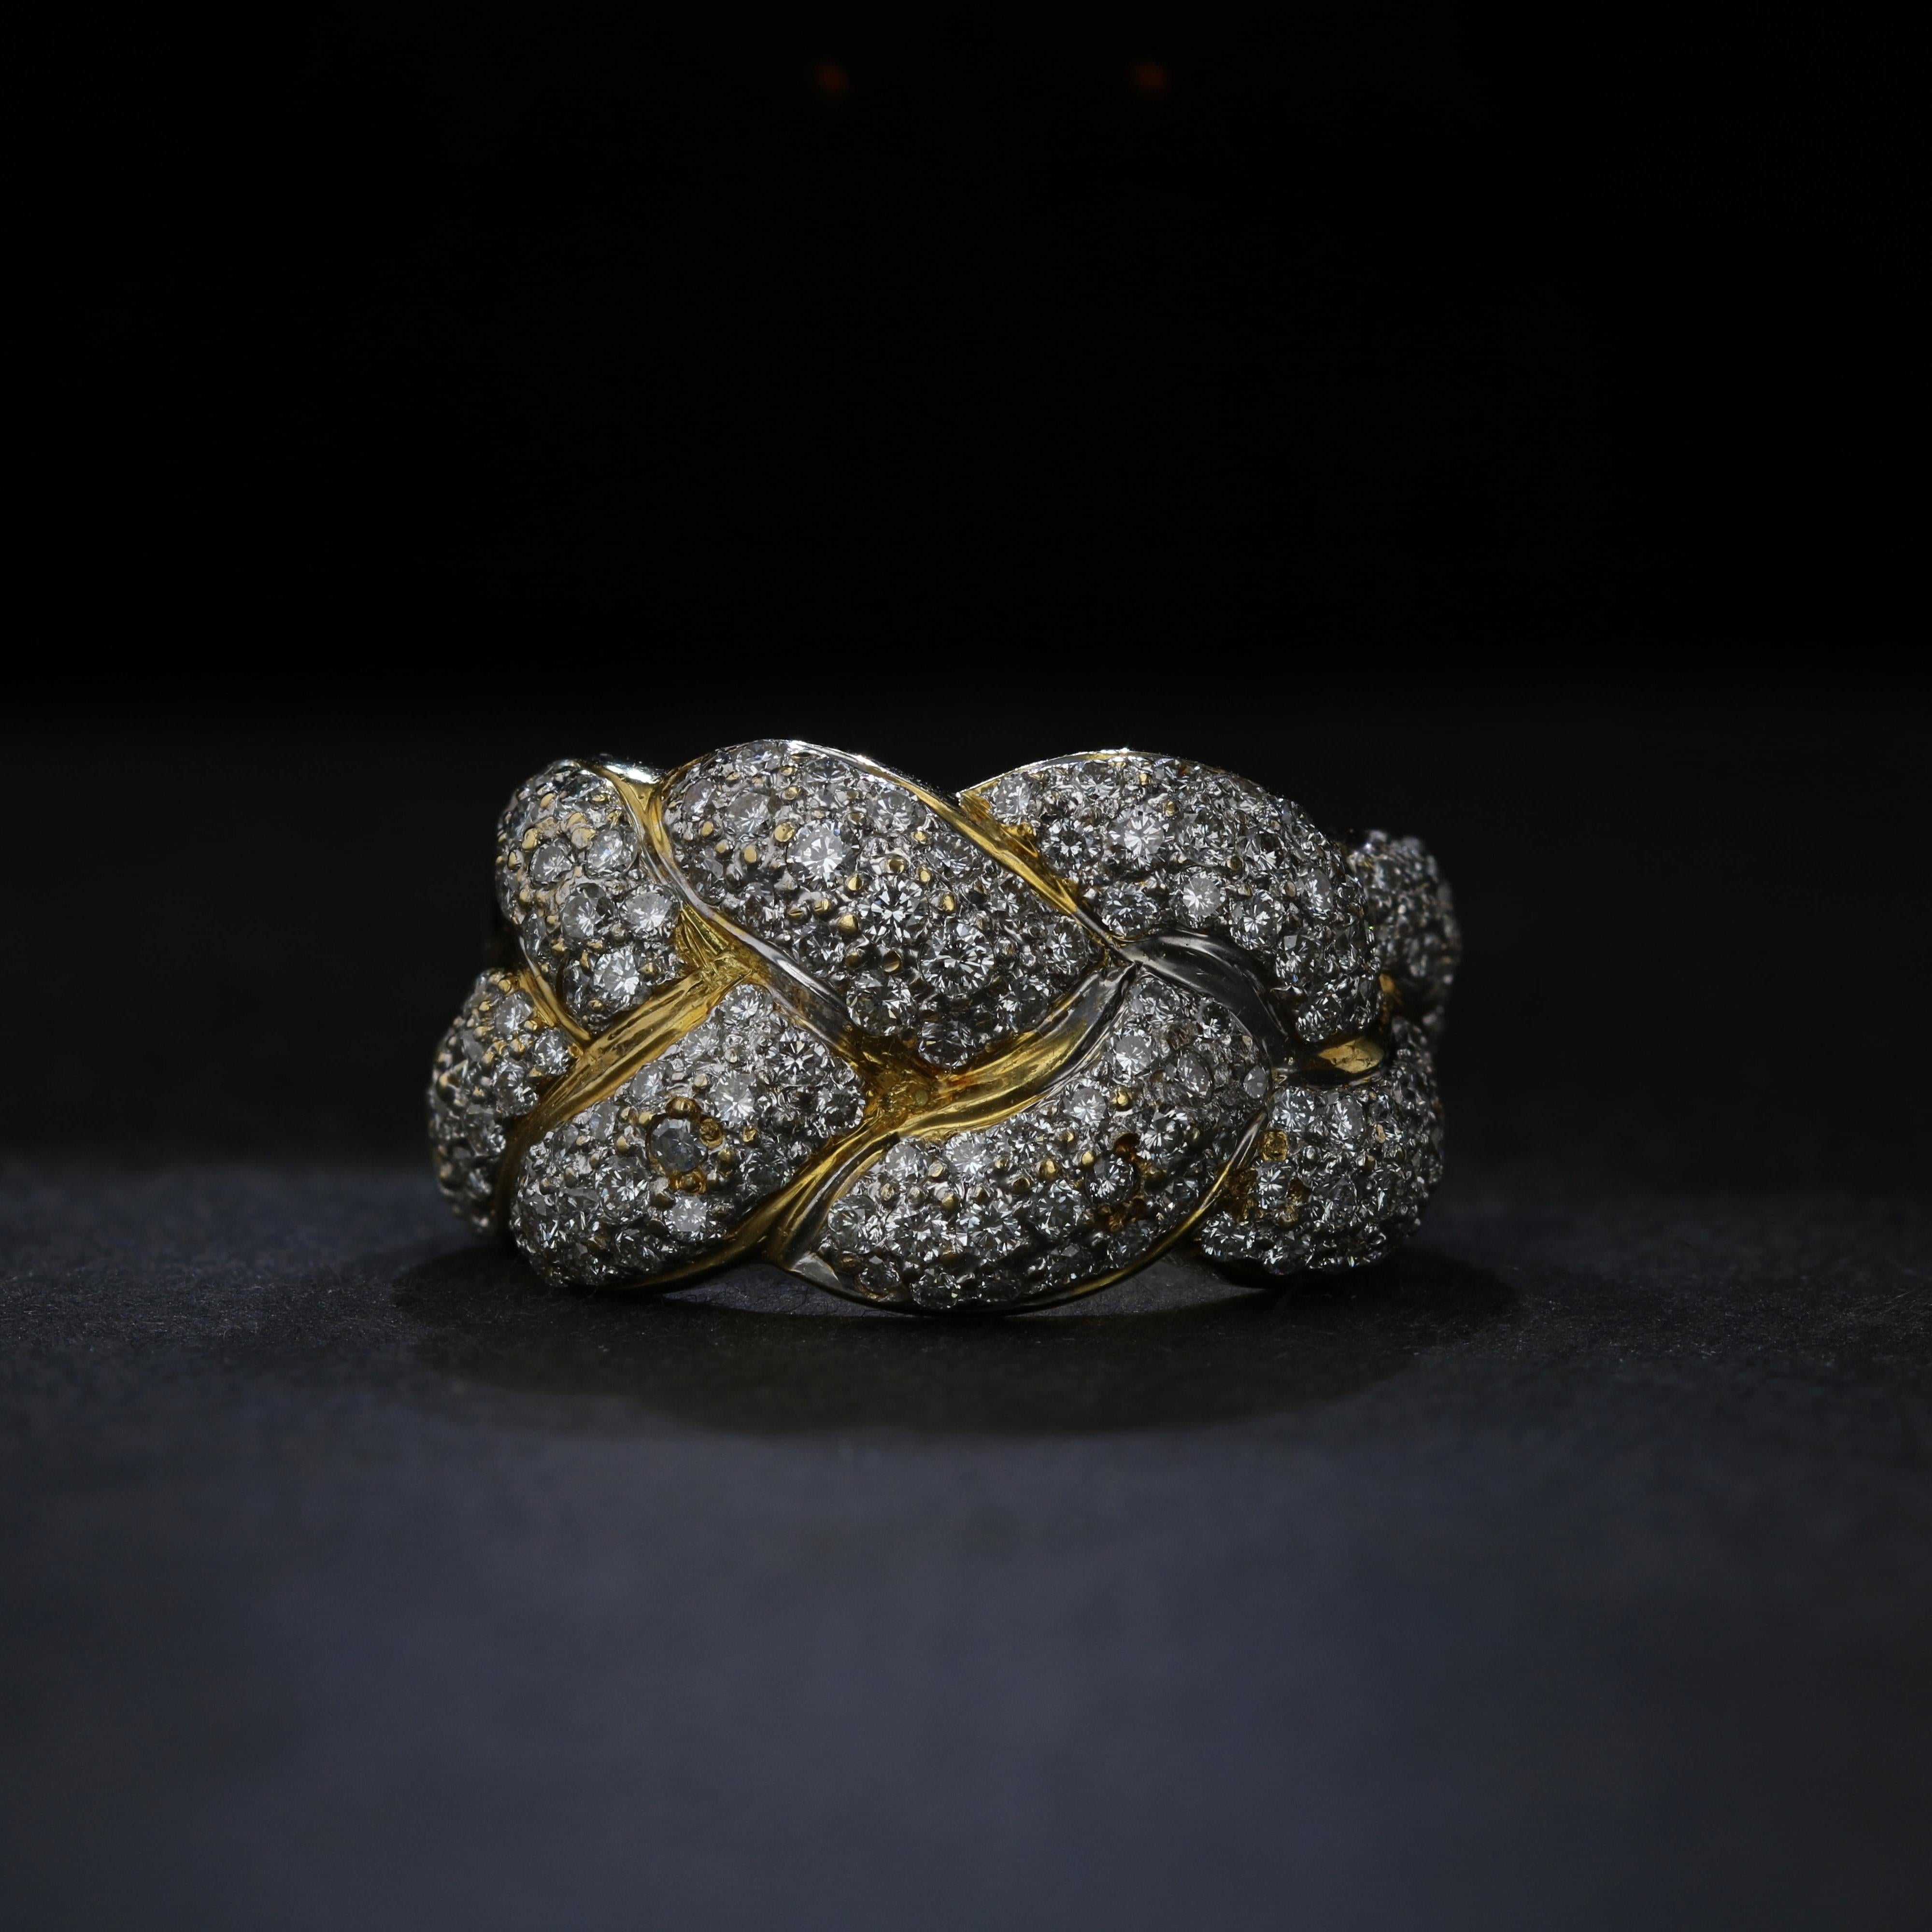 18K white and yellow gold come together in a braid motif to envelop approximately 143 pave set round brilliant diamonds in this retro ring. The diamonds together weigh approximately 2.50 carats and have average color of J and average clarity of SI2. 